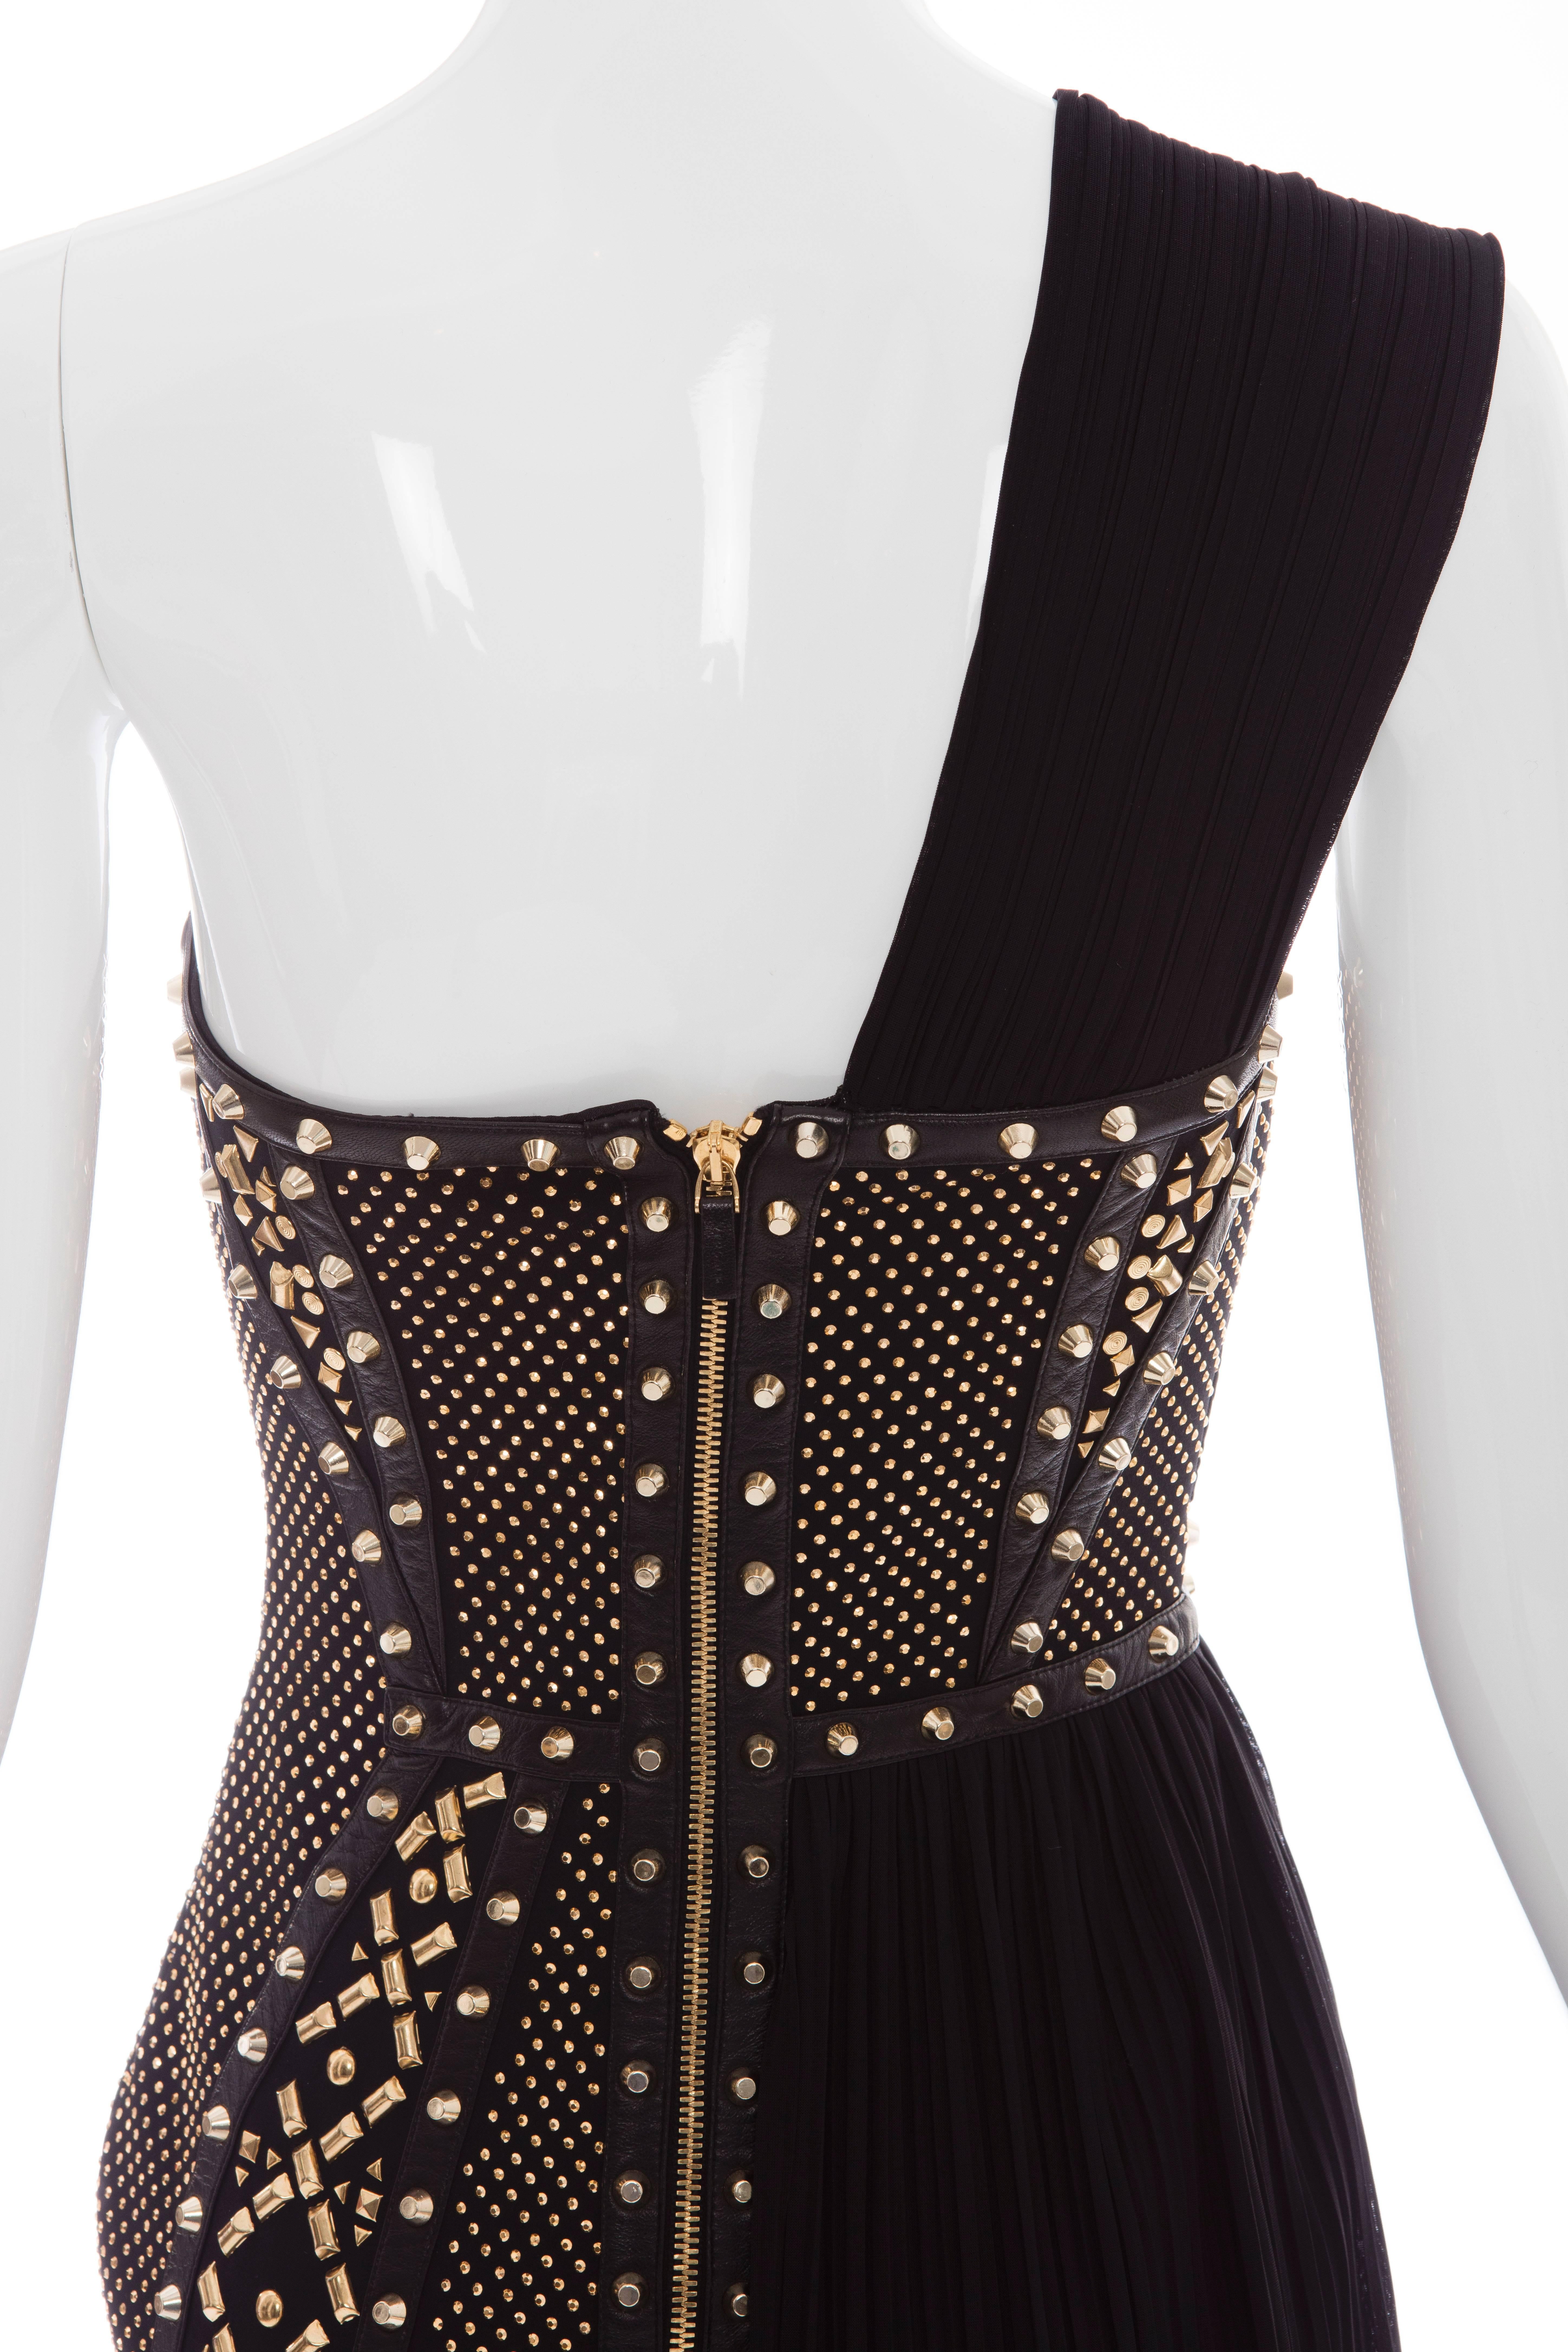 Versace Geometric Studded Dress with Leather Trim, Spring 2012 3